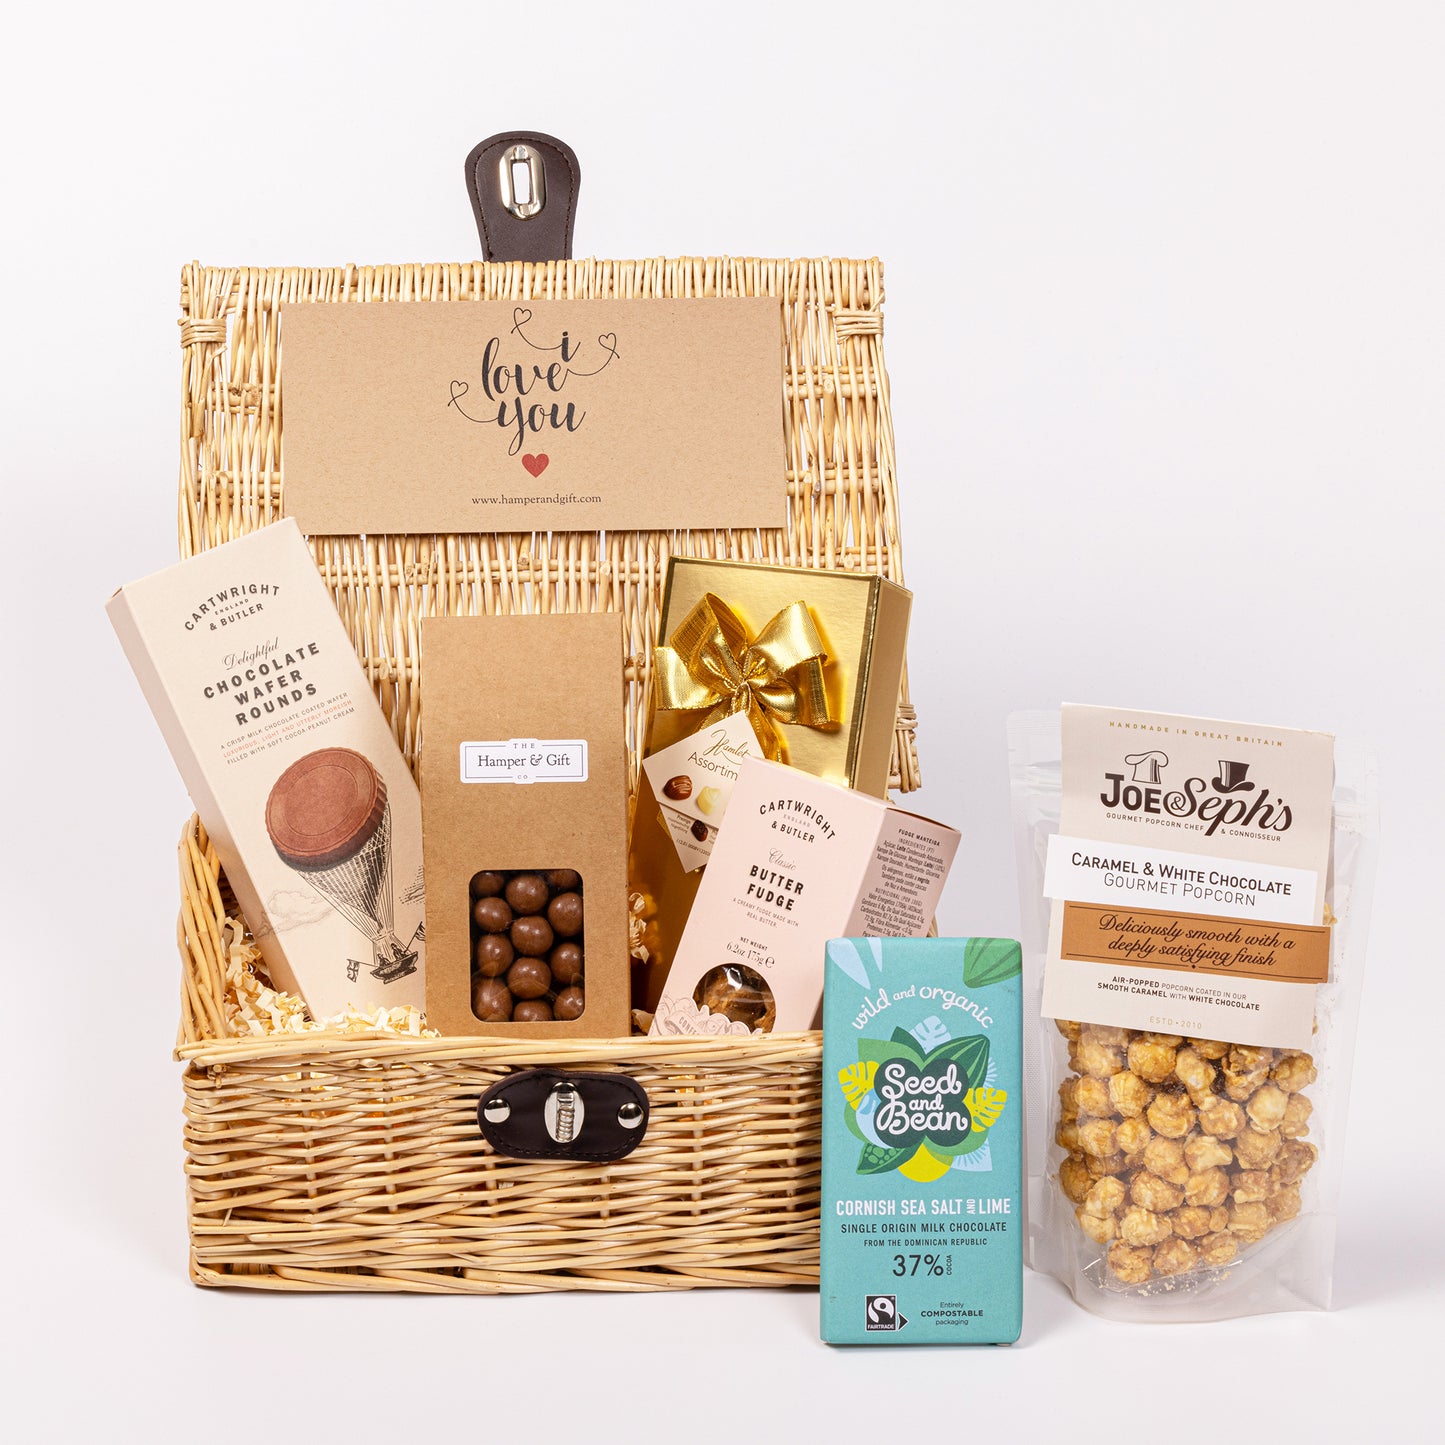 I Love You Chocolate & Fudge Hamper filled with a variety of chocolate, fudge, biscuit and gourmet popcorn